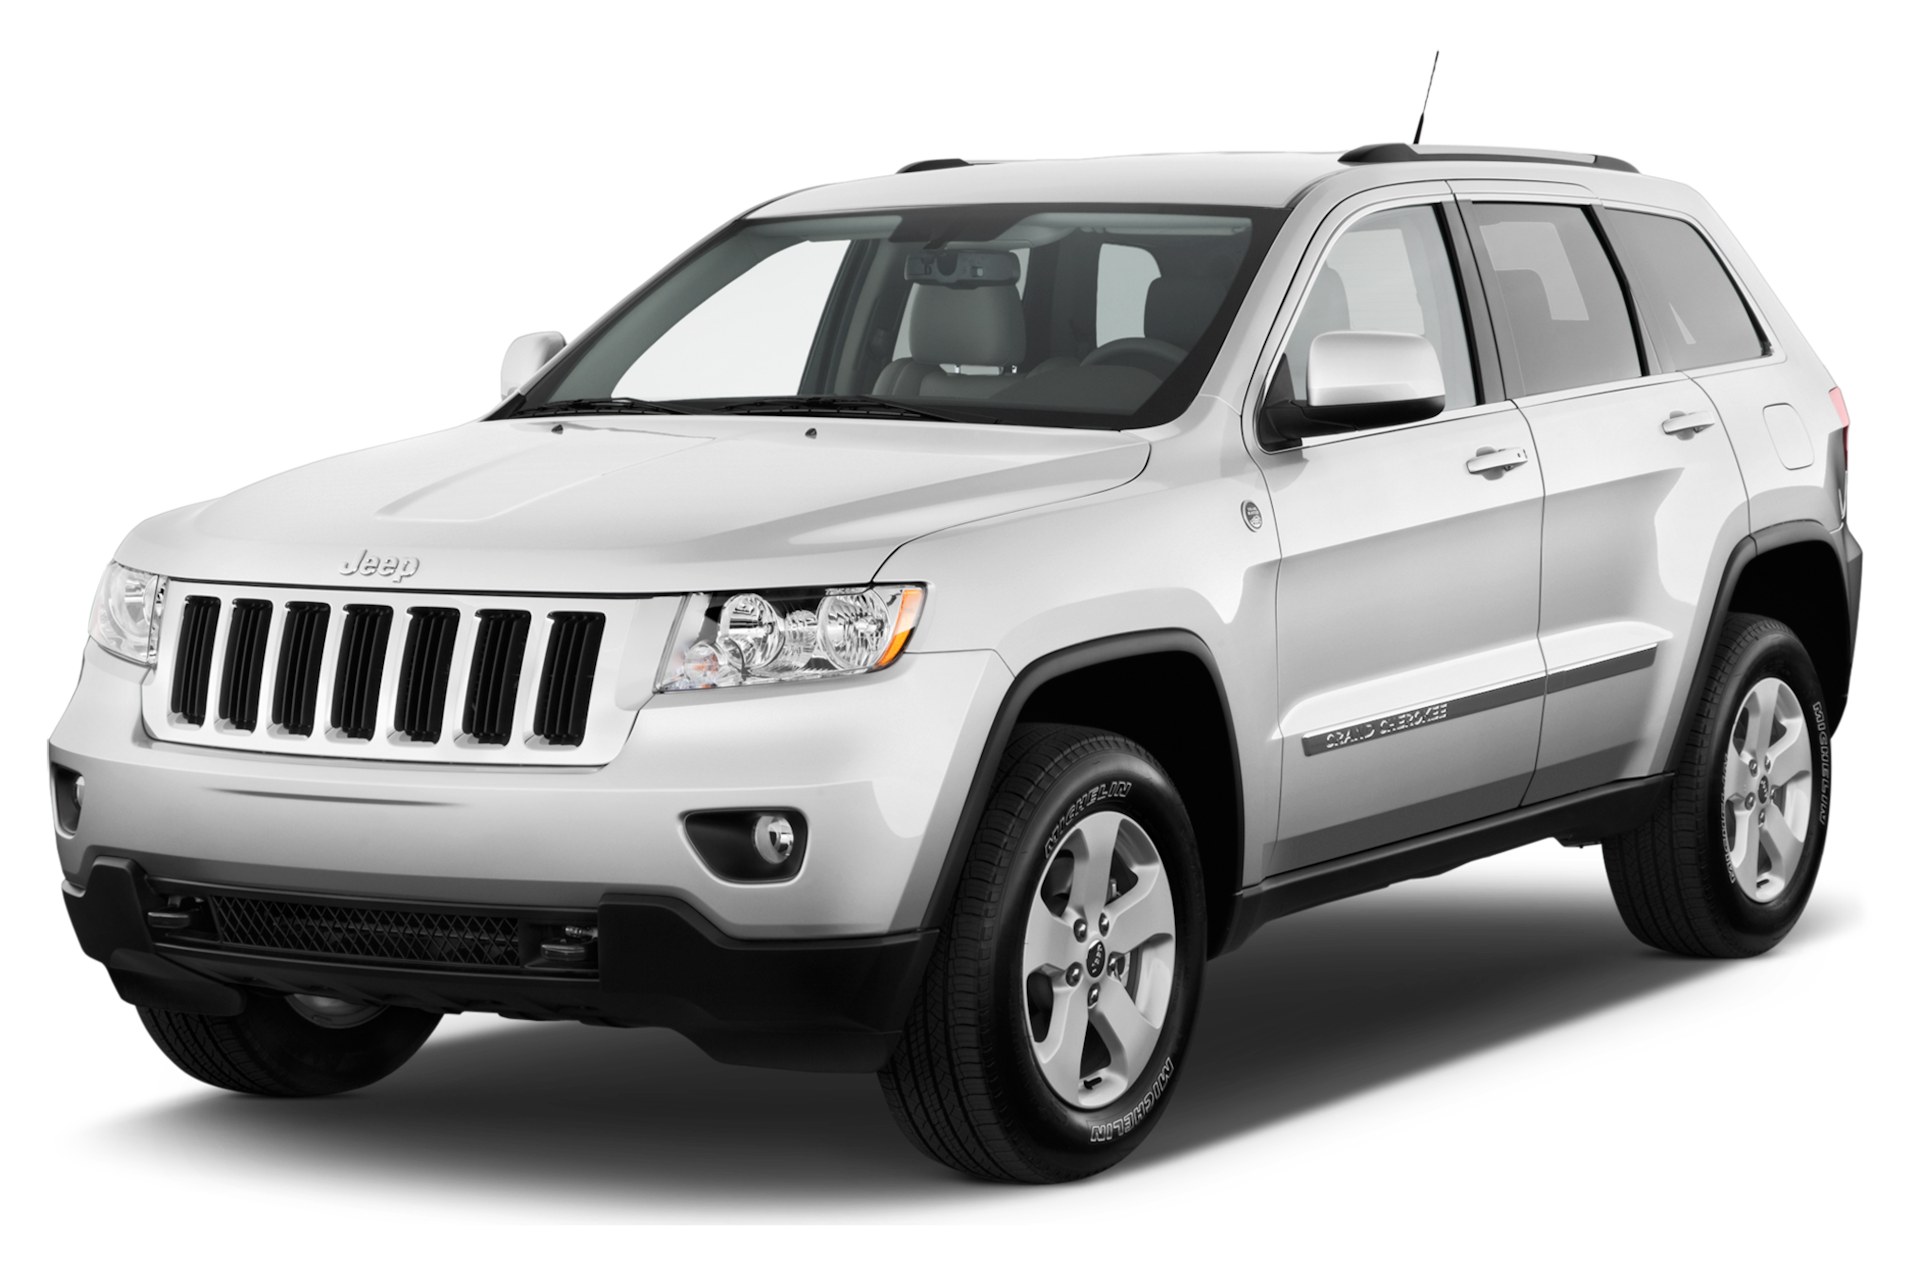 2013 Jeep Grand Cherokee Prices, Reviews, and Photos - MotorTrend